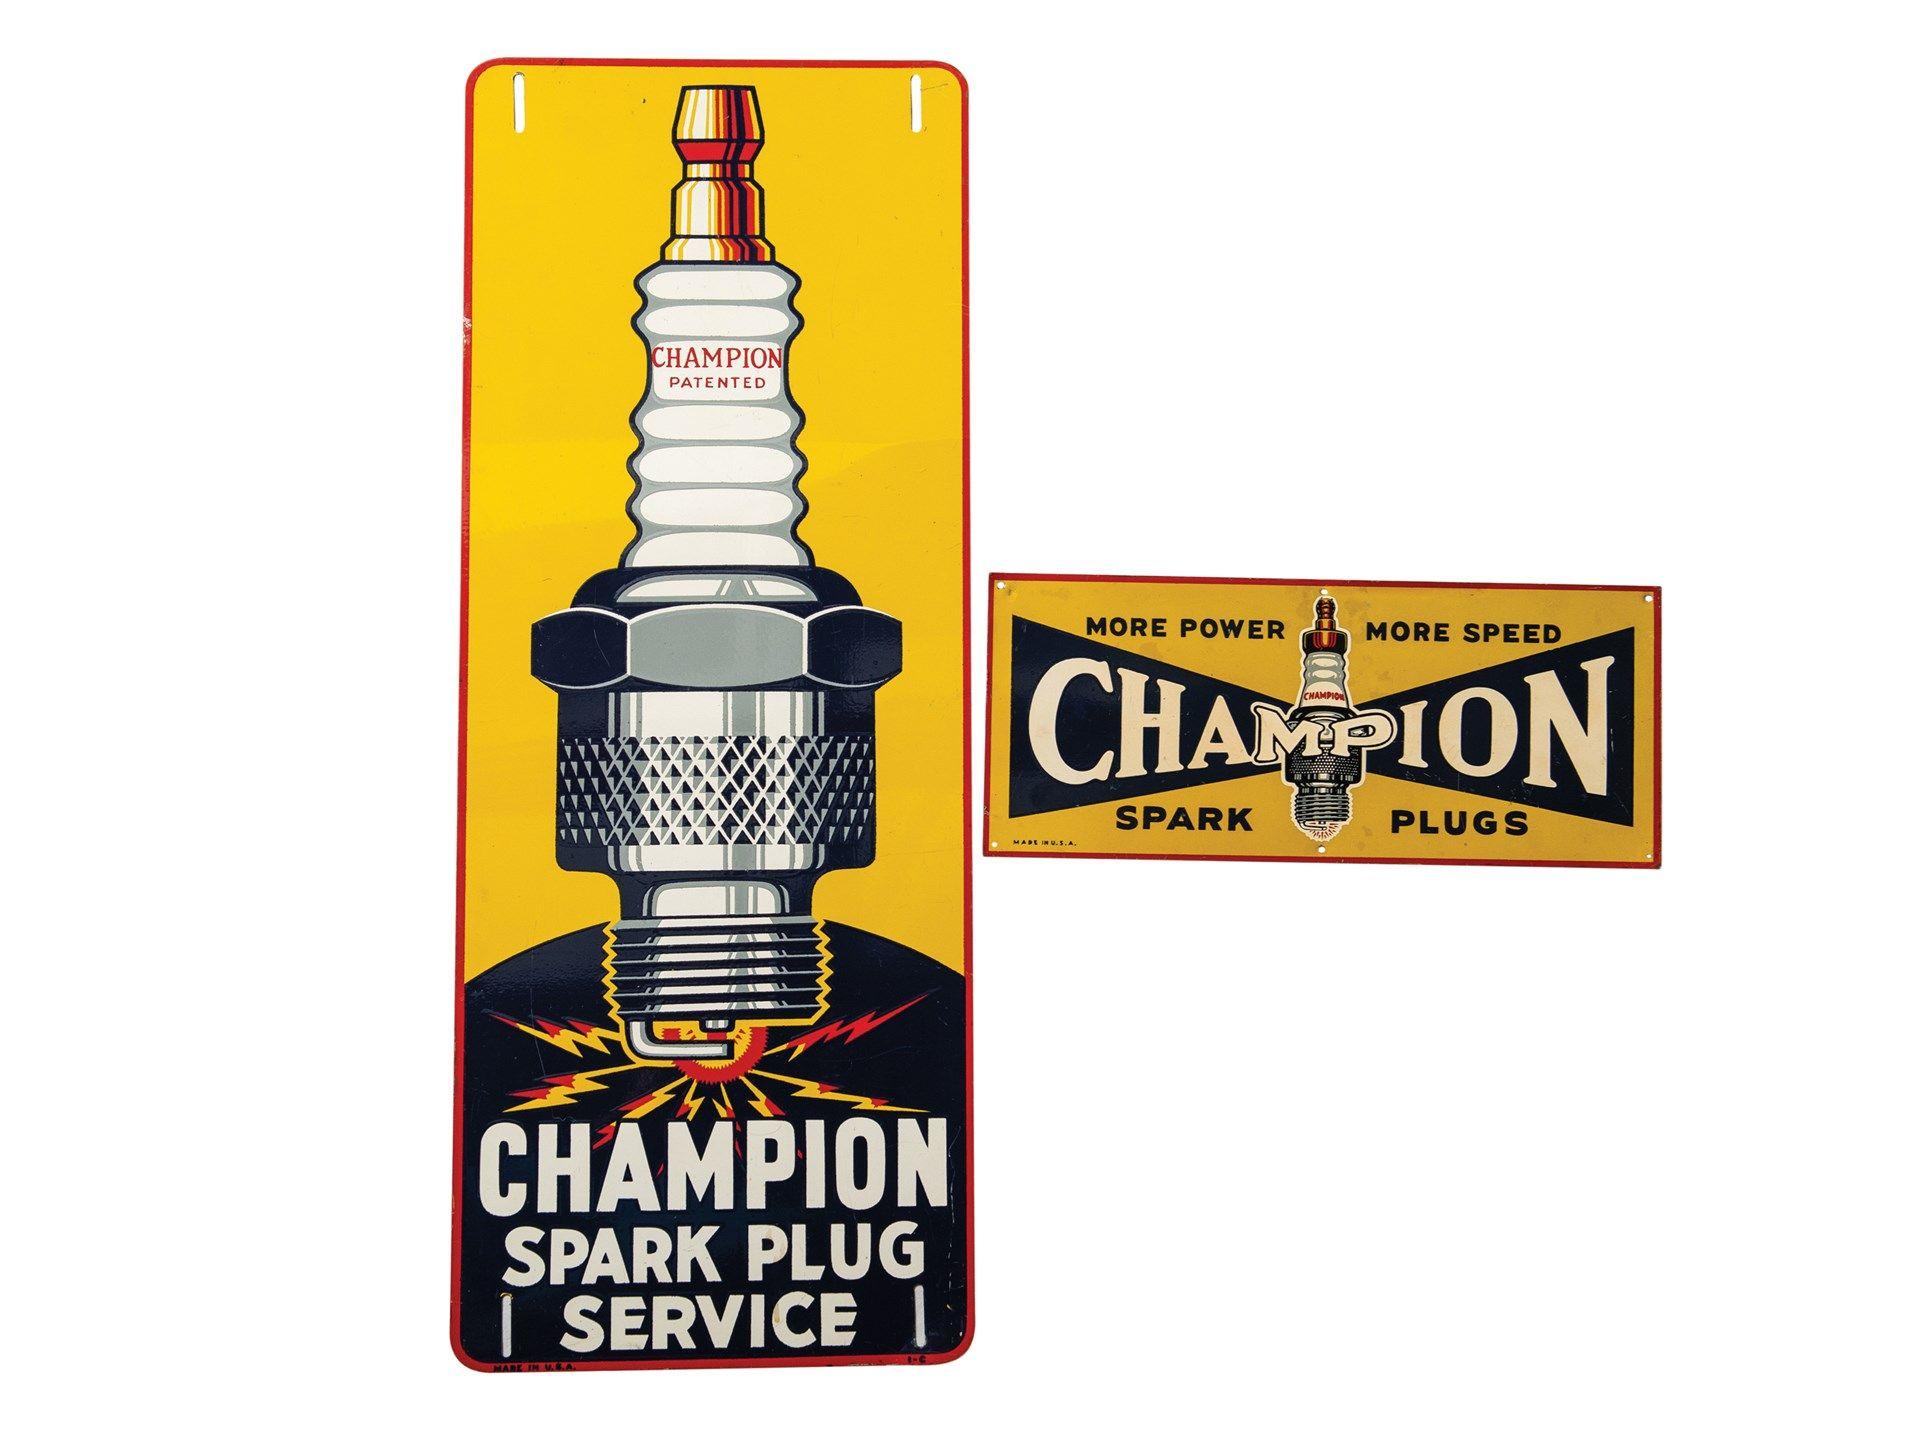 Champion Spark Plugs Logo - RM Sotheby's - Champion Spark Plugs Signs | The Dingman Collection